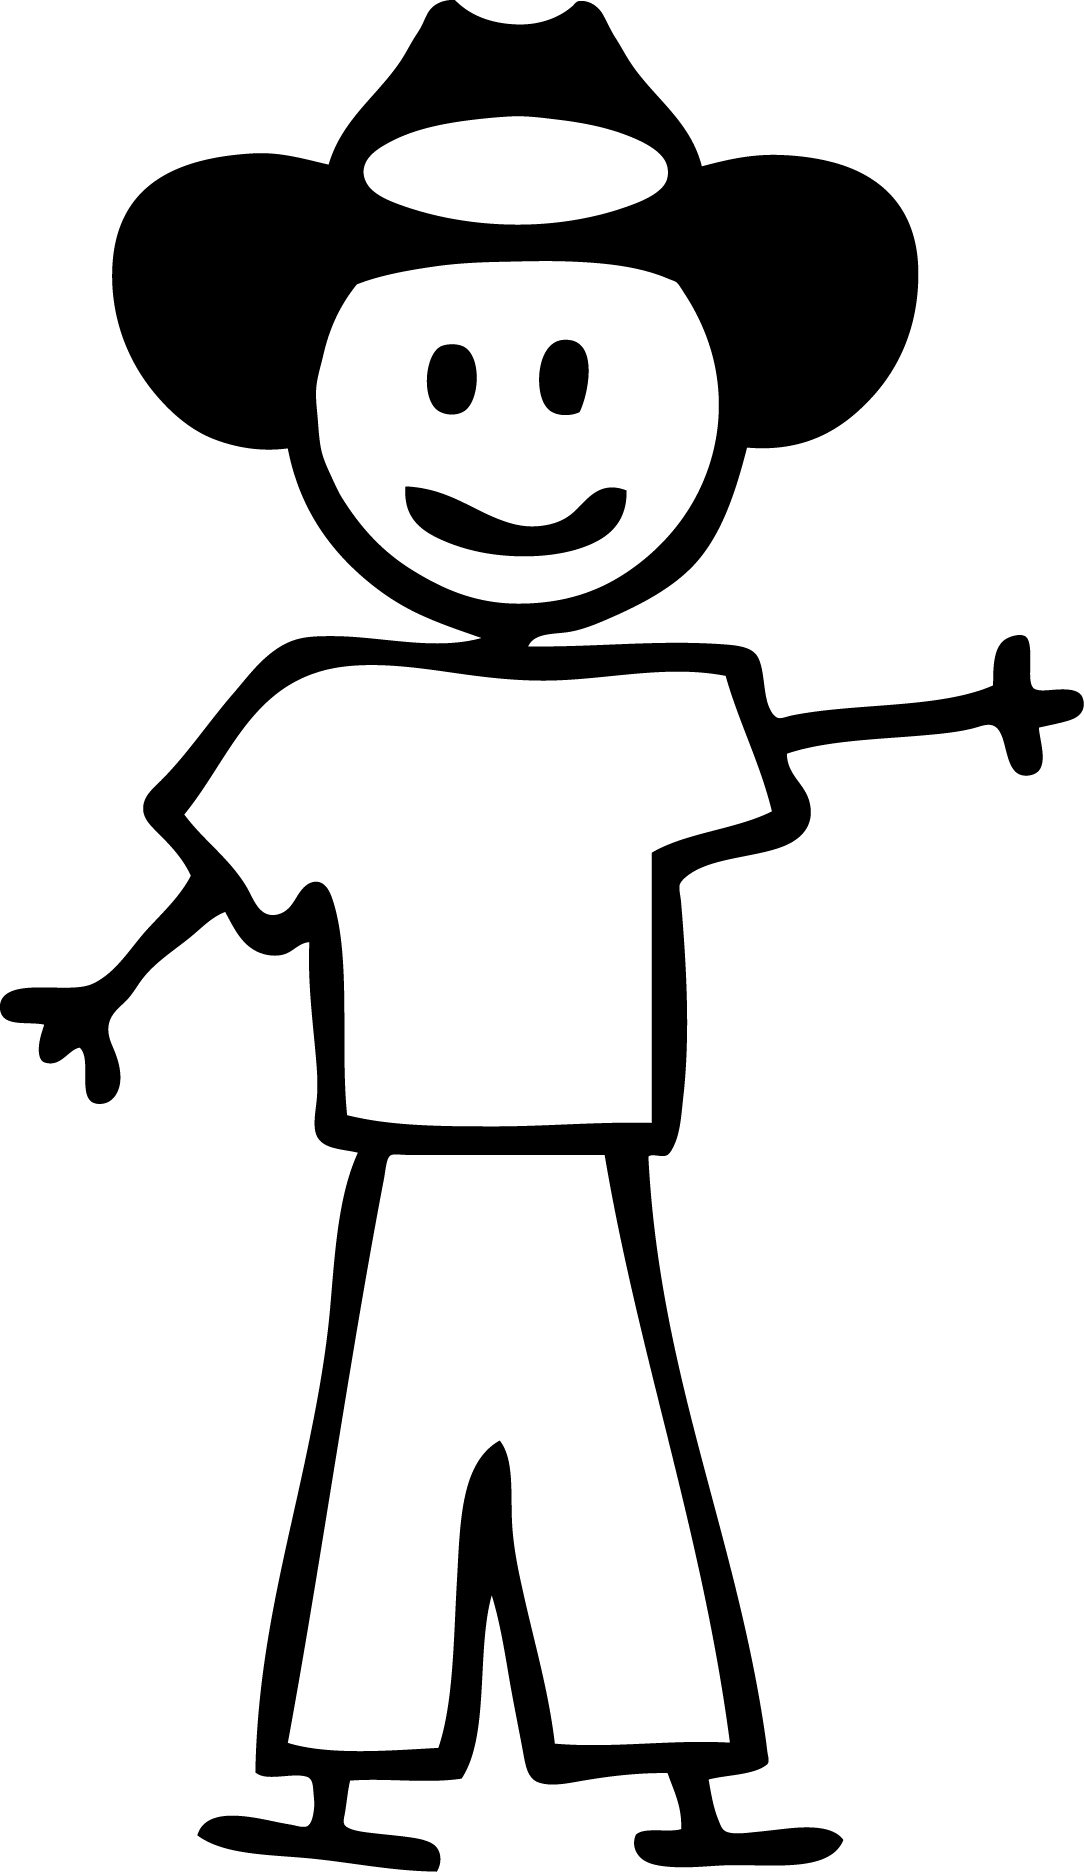 Free Stick People, Download Free Clip Art, Free Clip Art on.